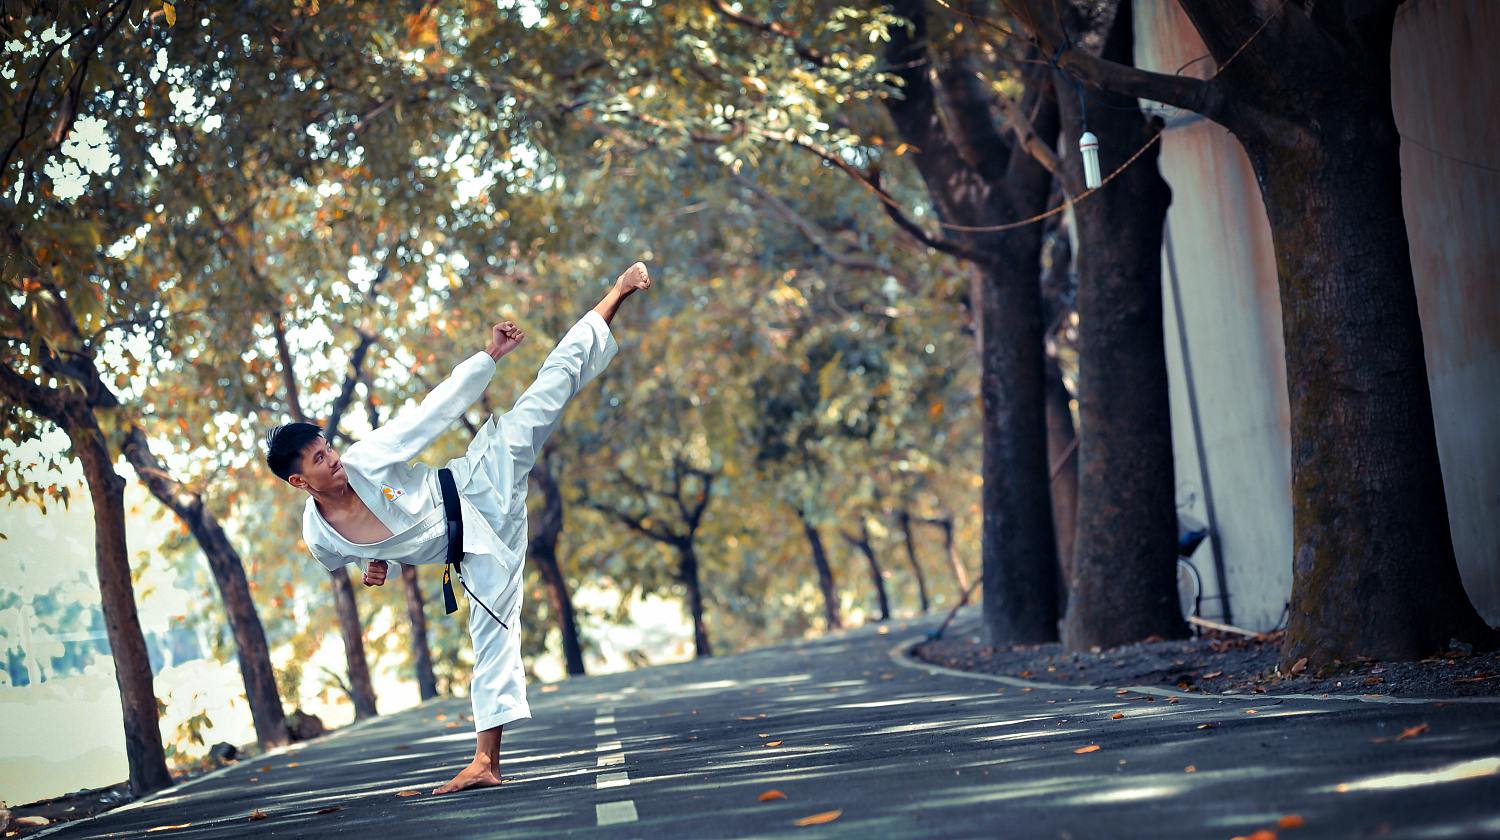 Featured | A man doing standing on road | Self-Defense Martial Arts For Personal Safety And Survival